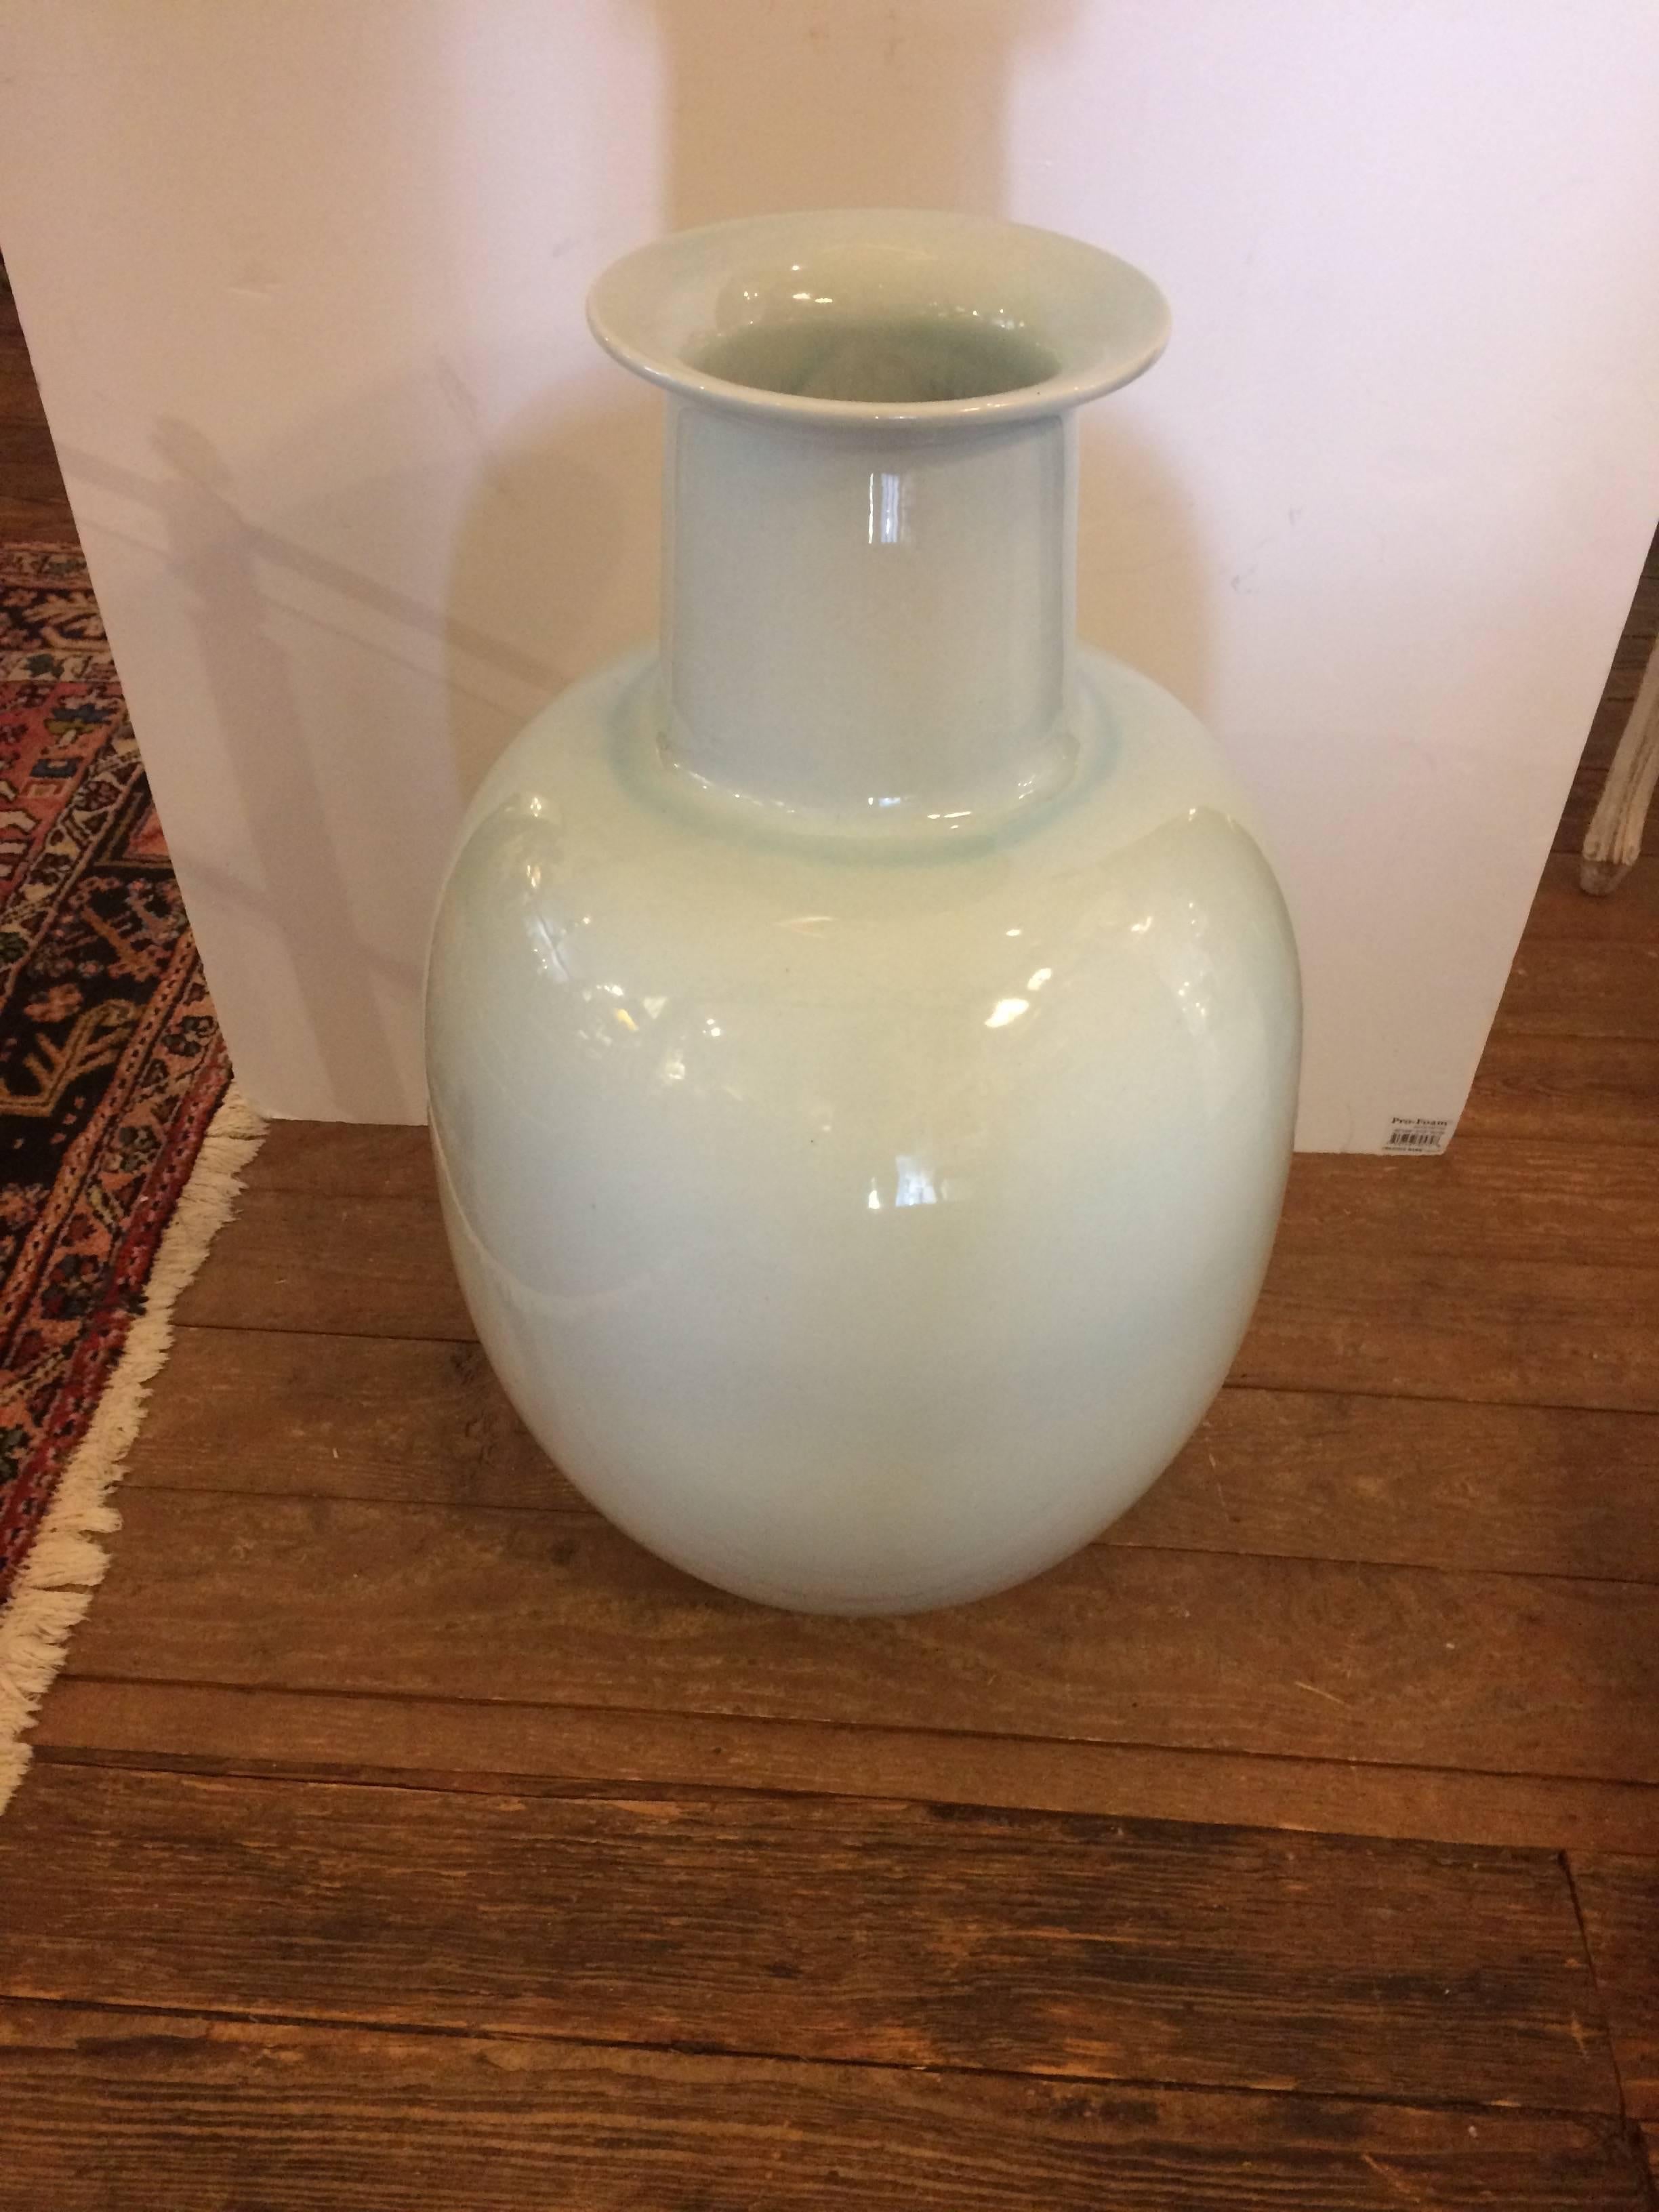 A very large lovely porcelain vessel in a cool soft shade of celadon or the lightest blue green. Opening is 9